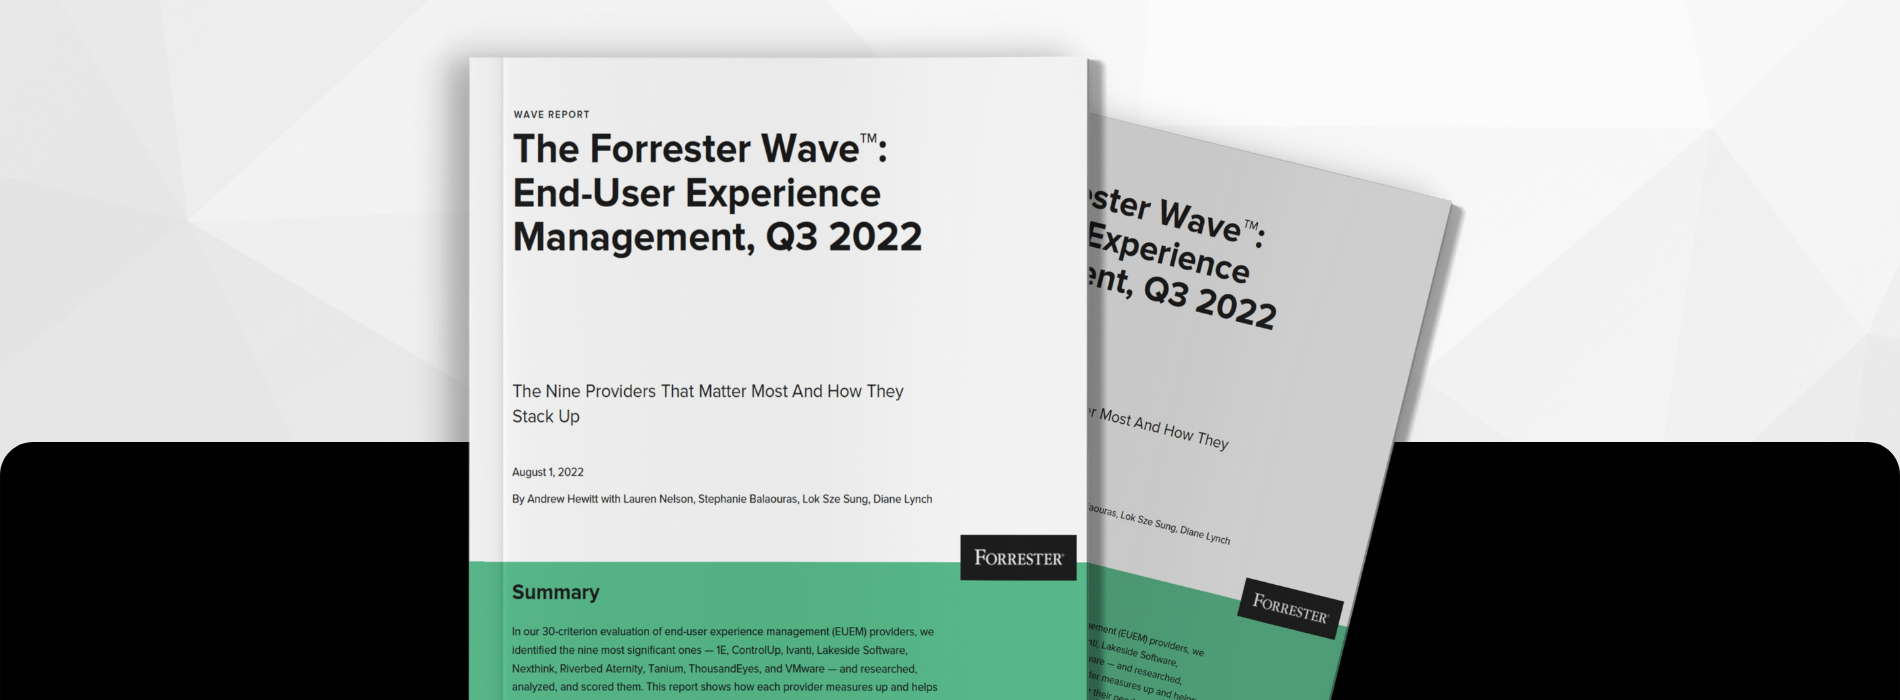 Graphic illustration showing a mockup of the Forrester Wave report.